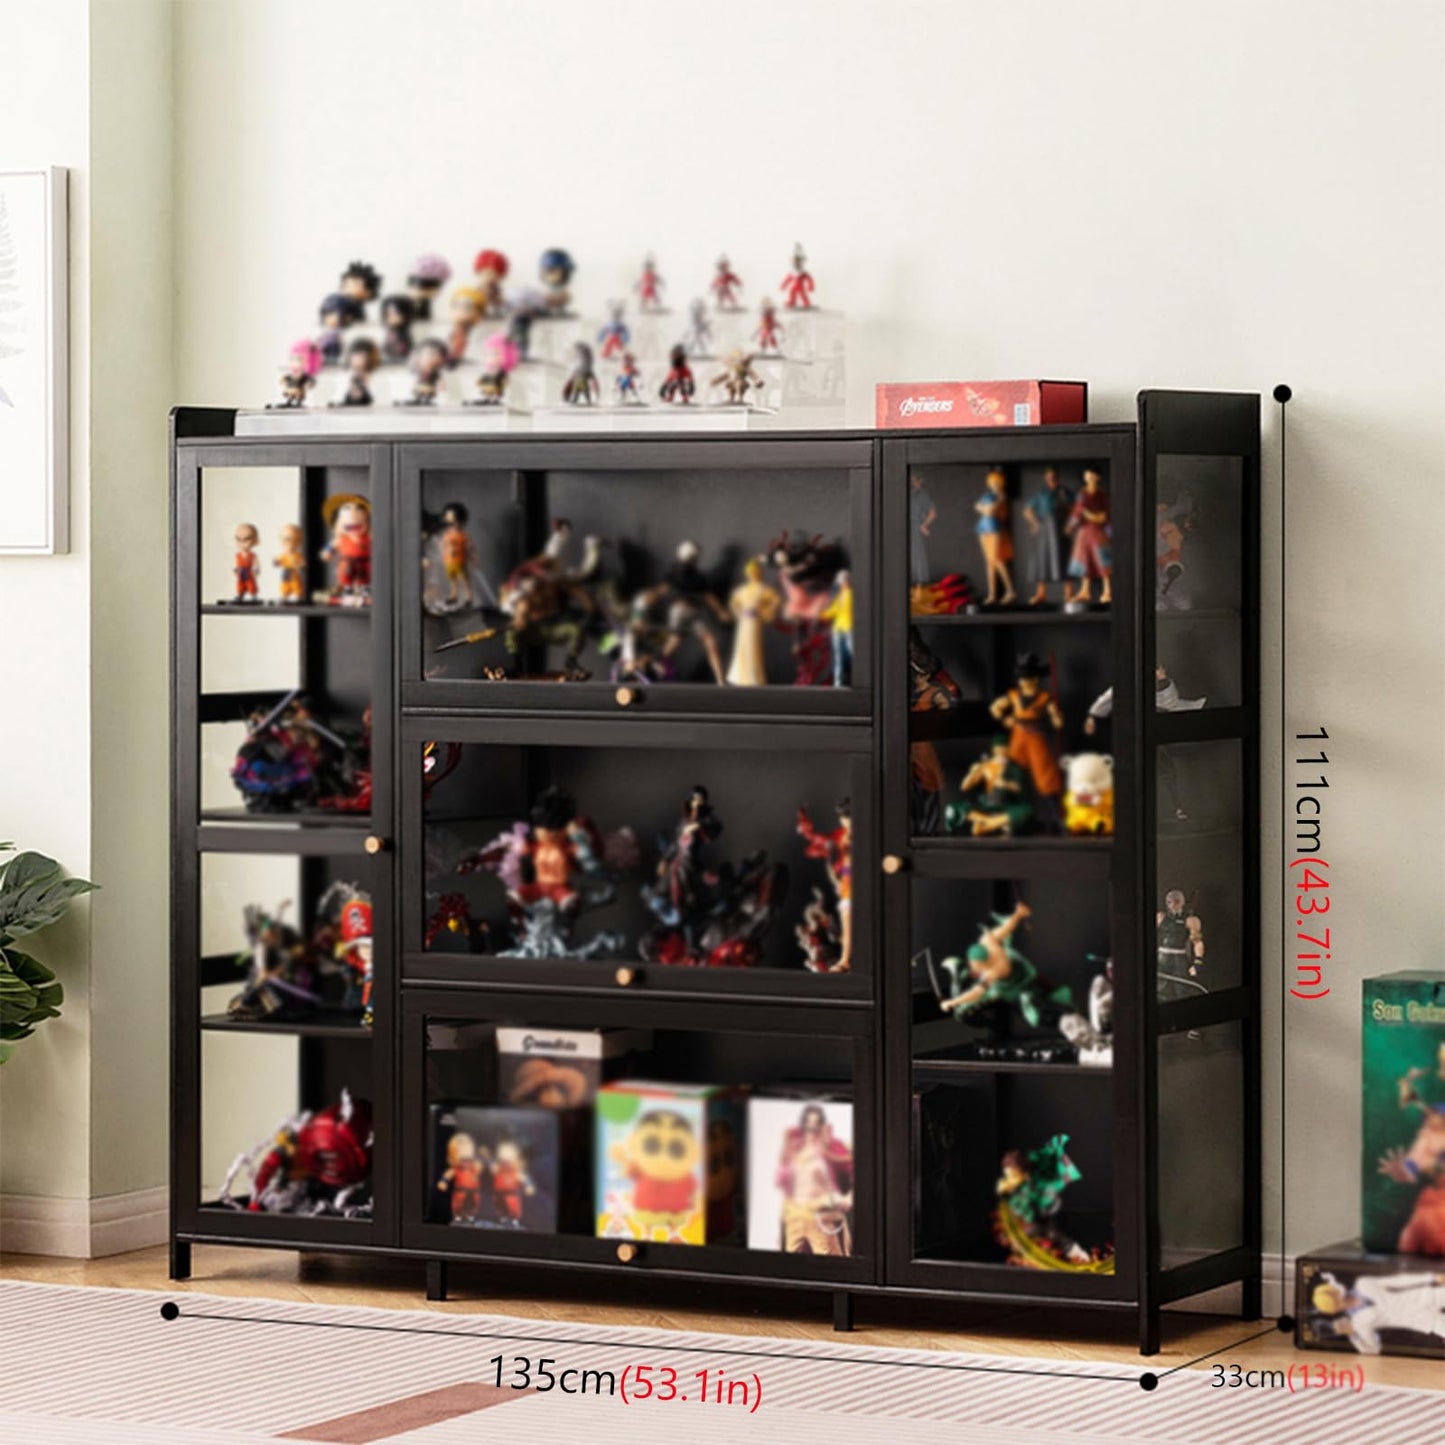 FVTVHEV Display Cabinet, Curio Cabinet with Acrylic Doors, Figures and Curio Collection Display Case, Floor Standing Clear Showcase for Living Room